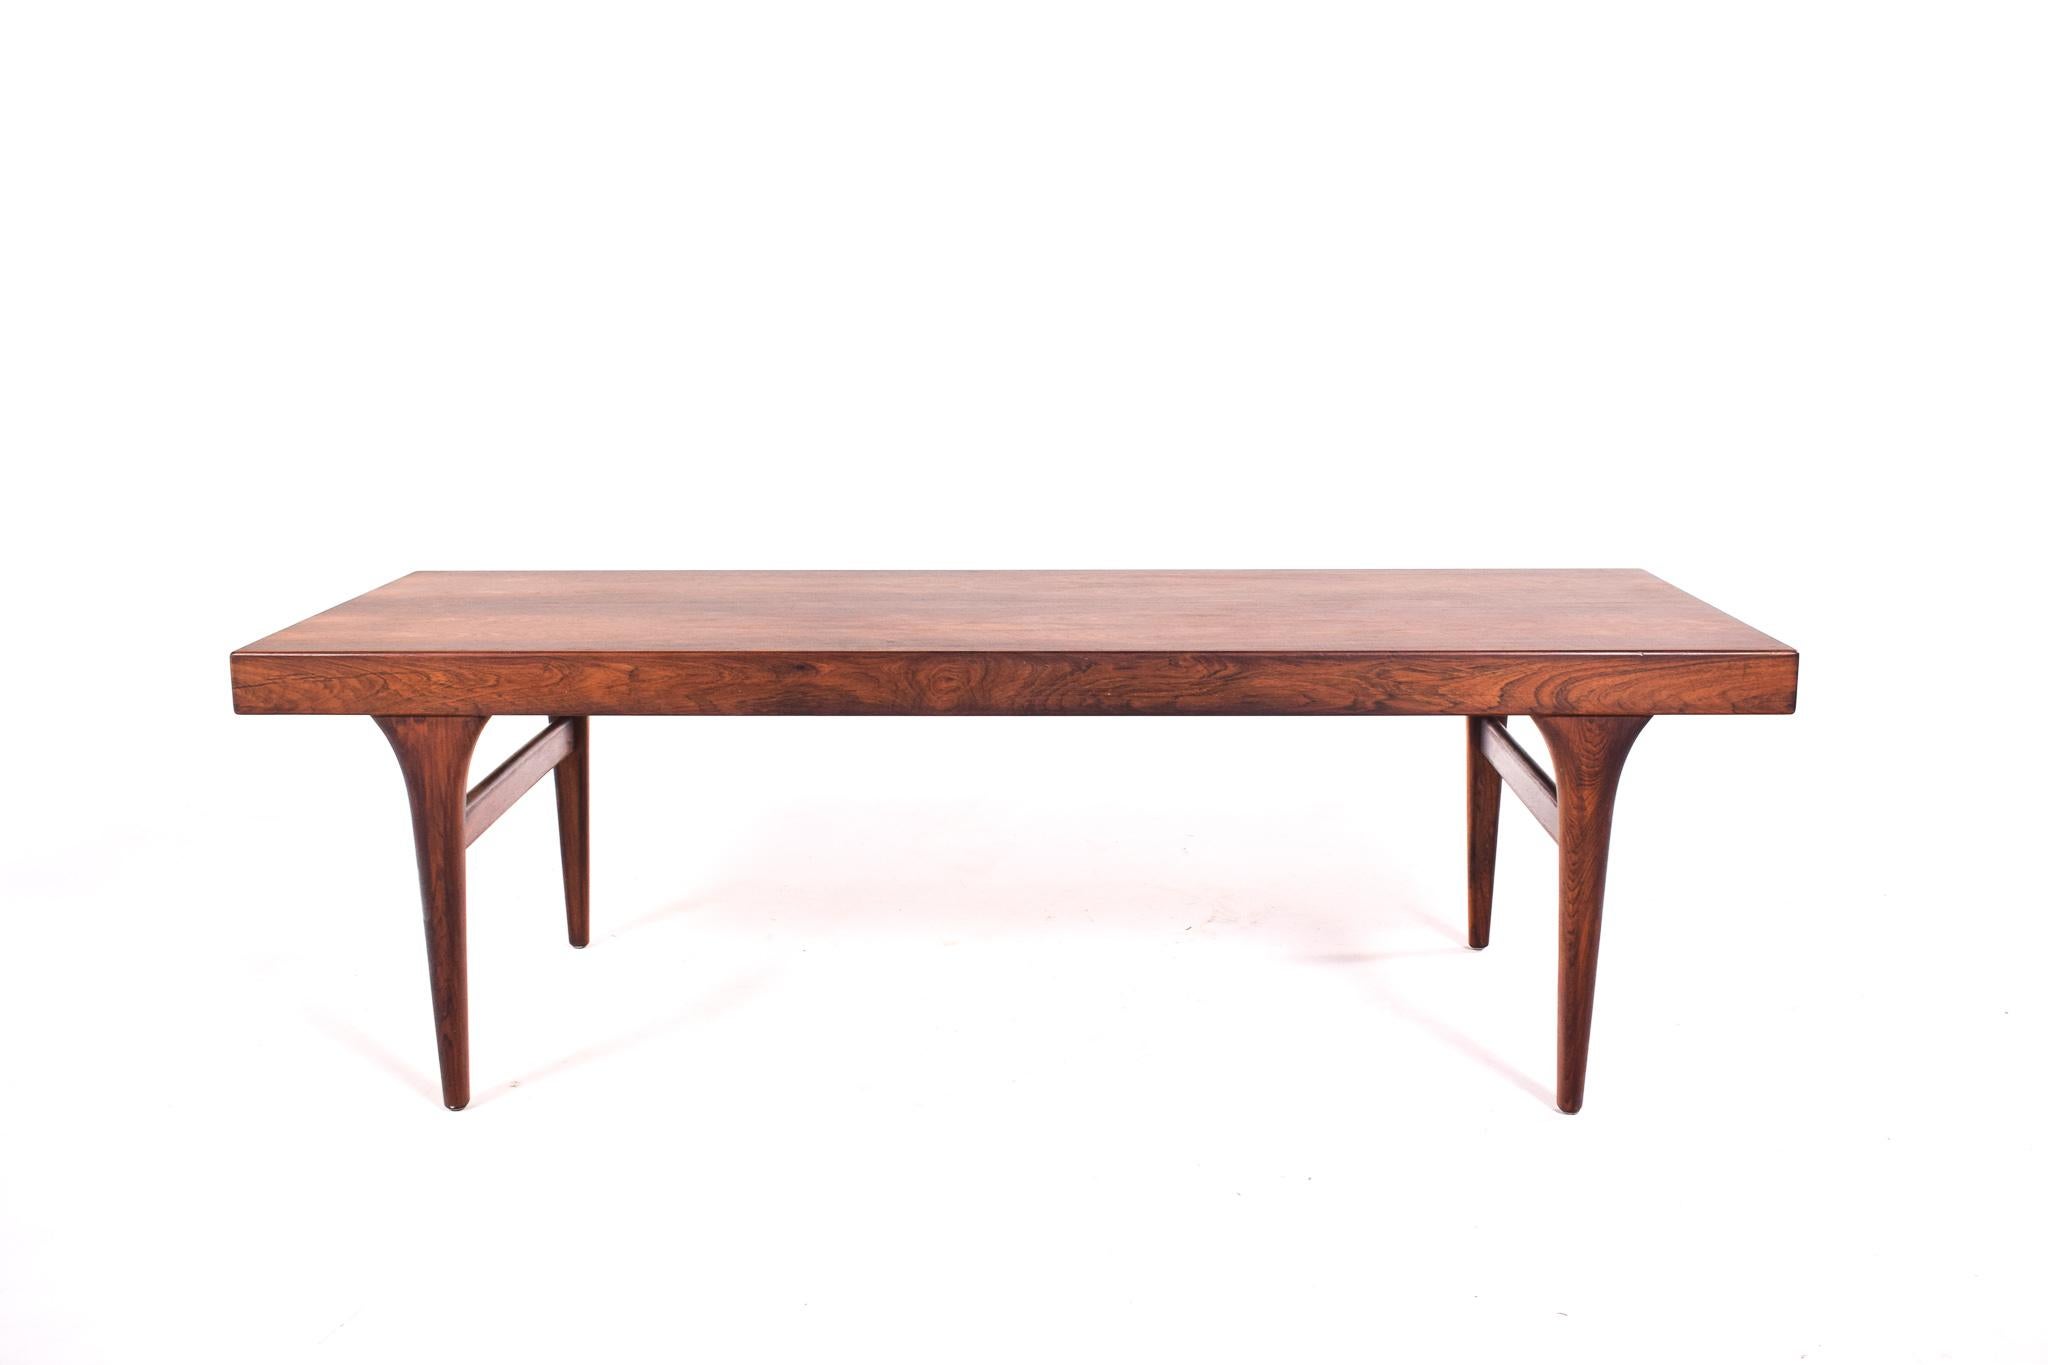 This authentic Mid-Century Modern coffee table, designed by Johannes Andersen for CFC Silkeborg, is a statement piece of the era, embodying the sleek lines and organic forms that are quintessential to Danish design. Crafted from rosewood, the table